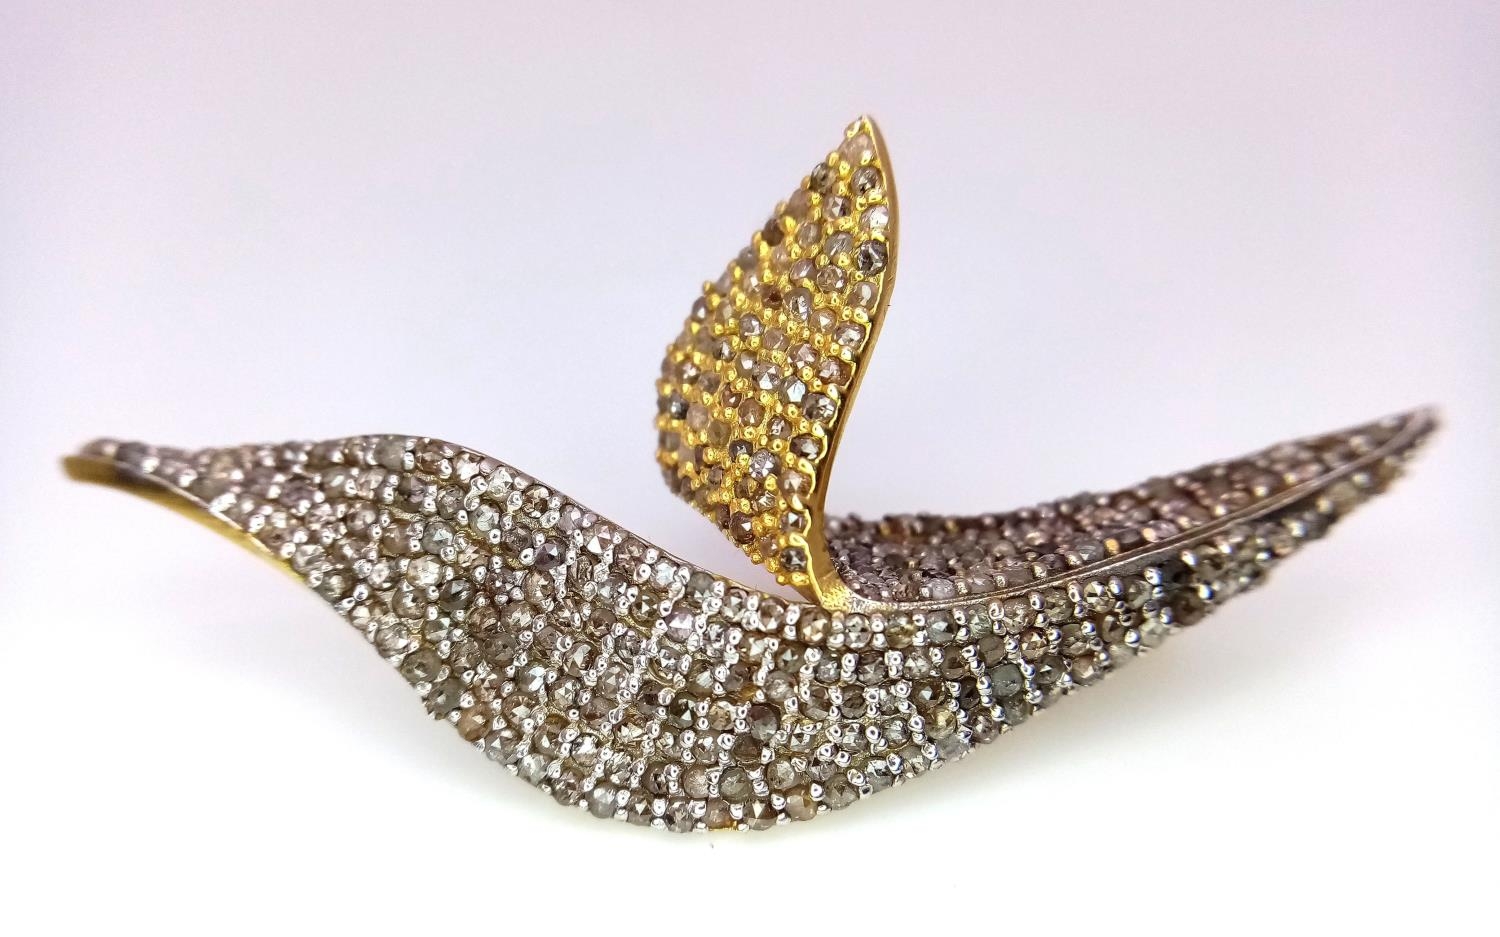 A Diamond Two Tone Leaf Cluster Brooch with 2ctw of Diamonds. Set in 925 Silver. 6g total weight.